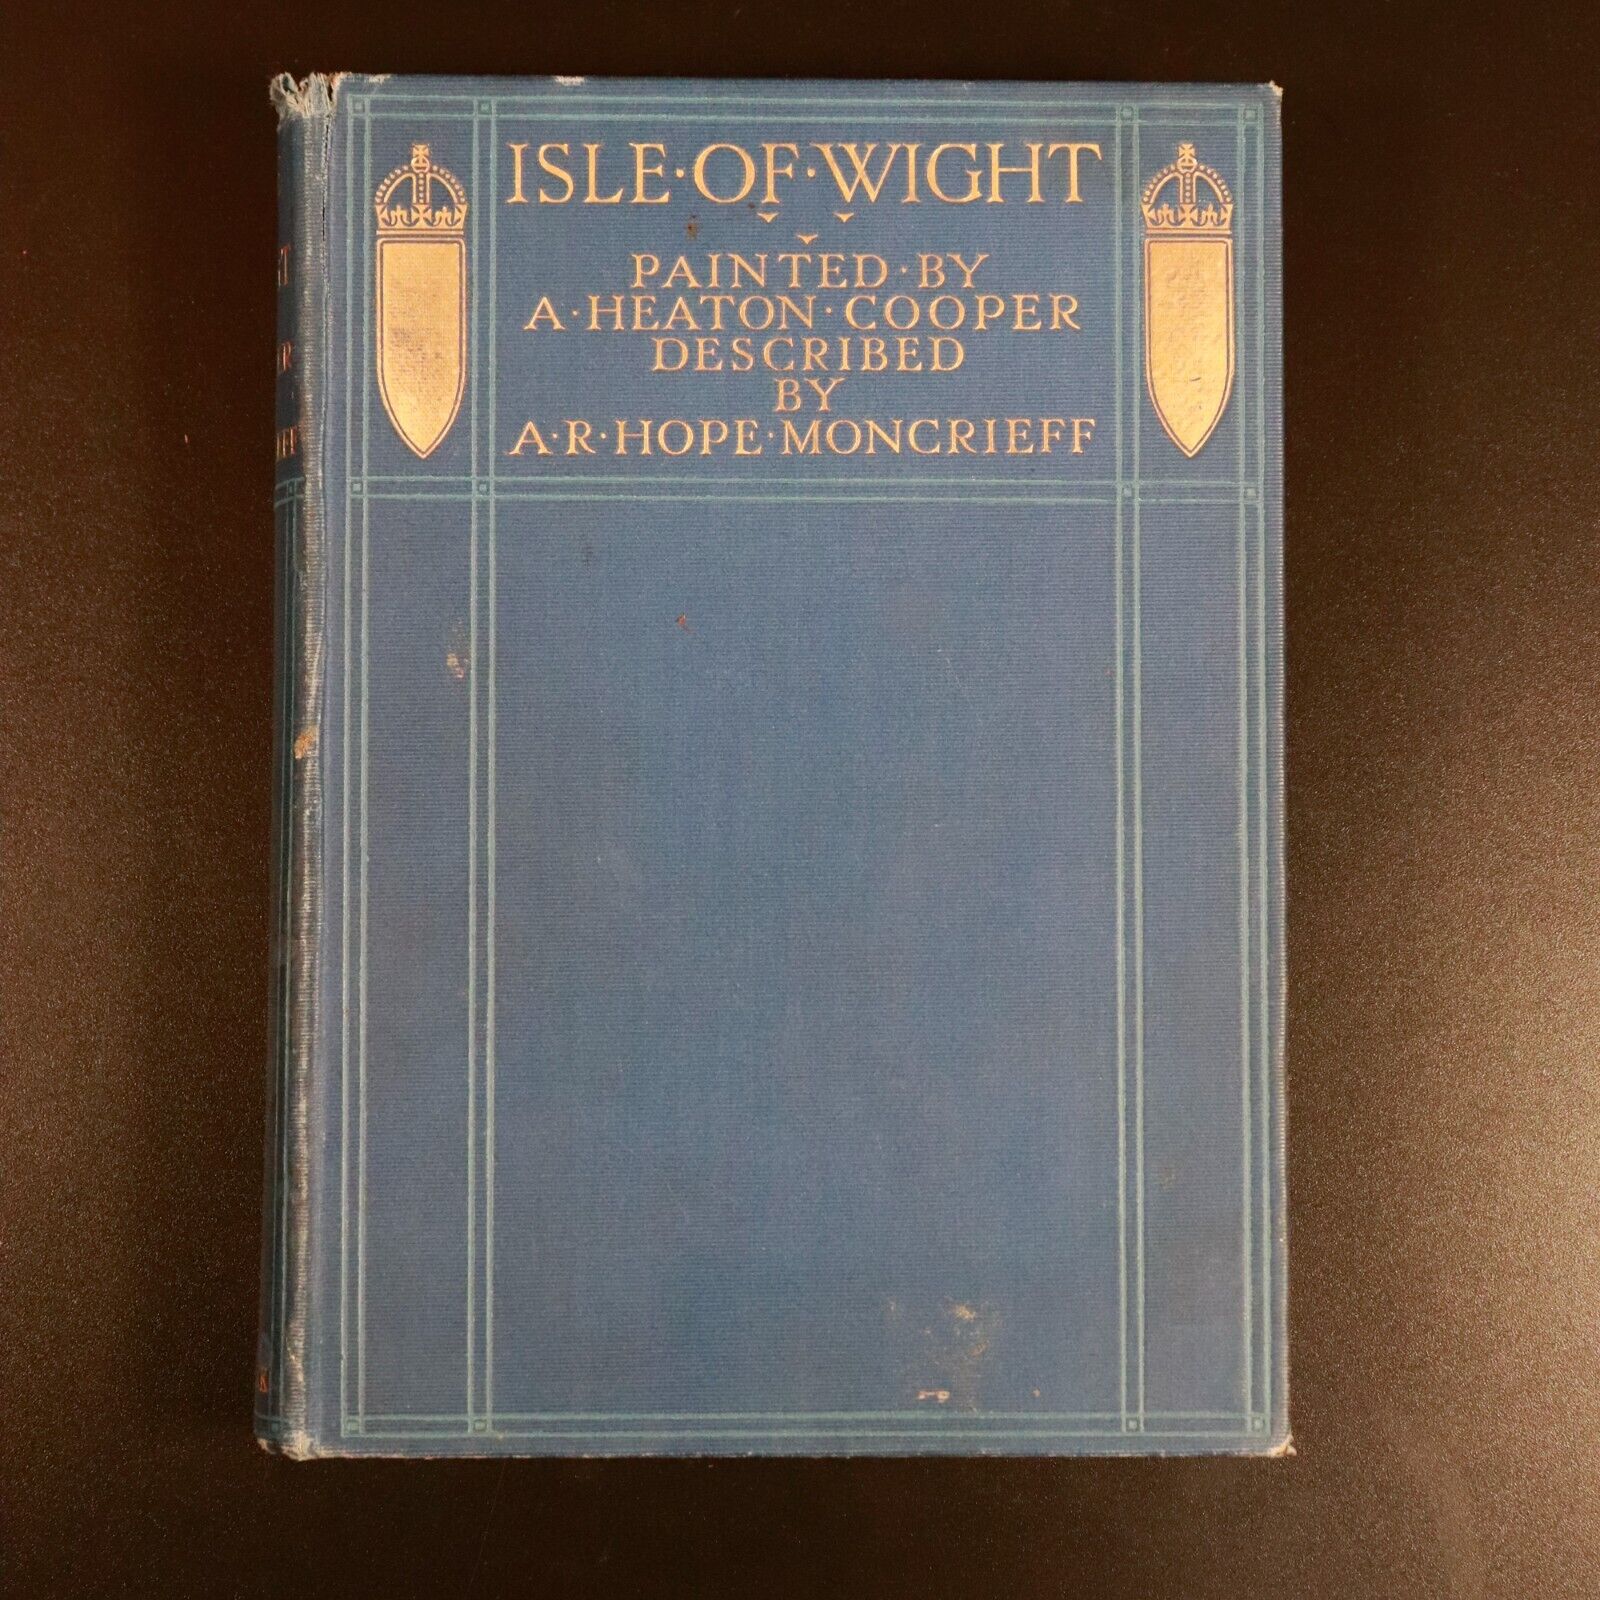 1908 Isle Of Wight by AR Hope Moncrieff & A Heaton Cooper Antique Book w/Map